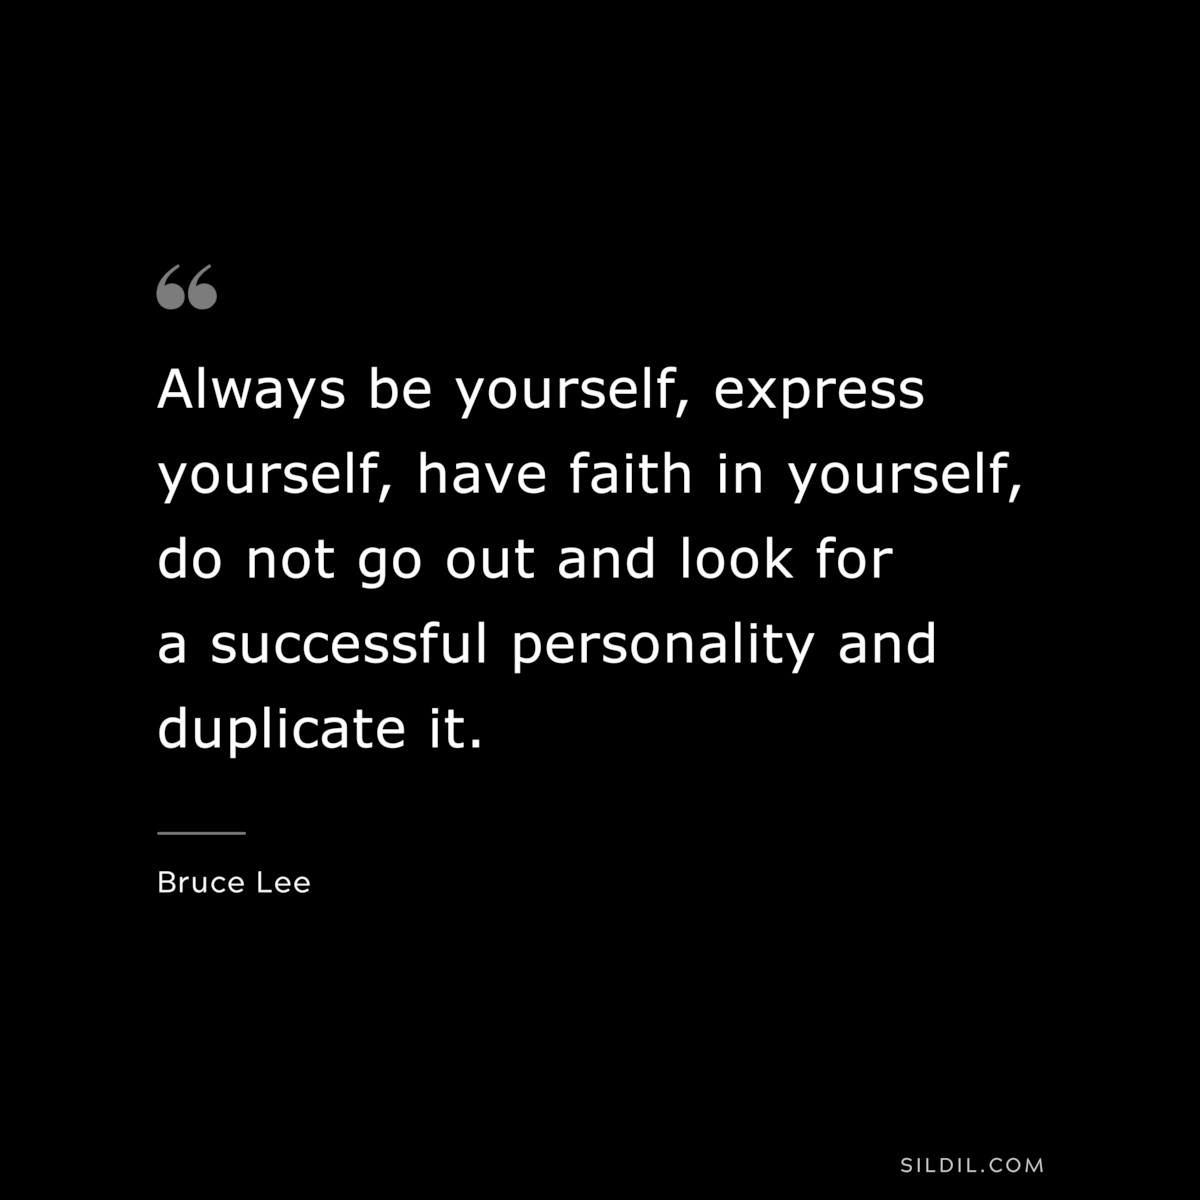 Always be yourself, express yourself, have faith in yourself, do not go out and look for a successful personality and duplicate it. ― Bruce Lee